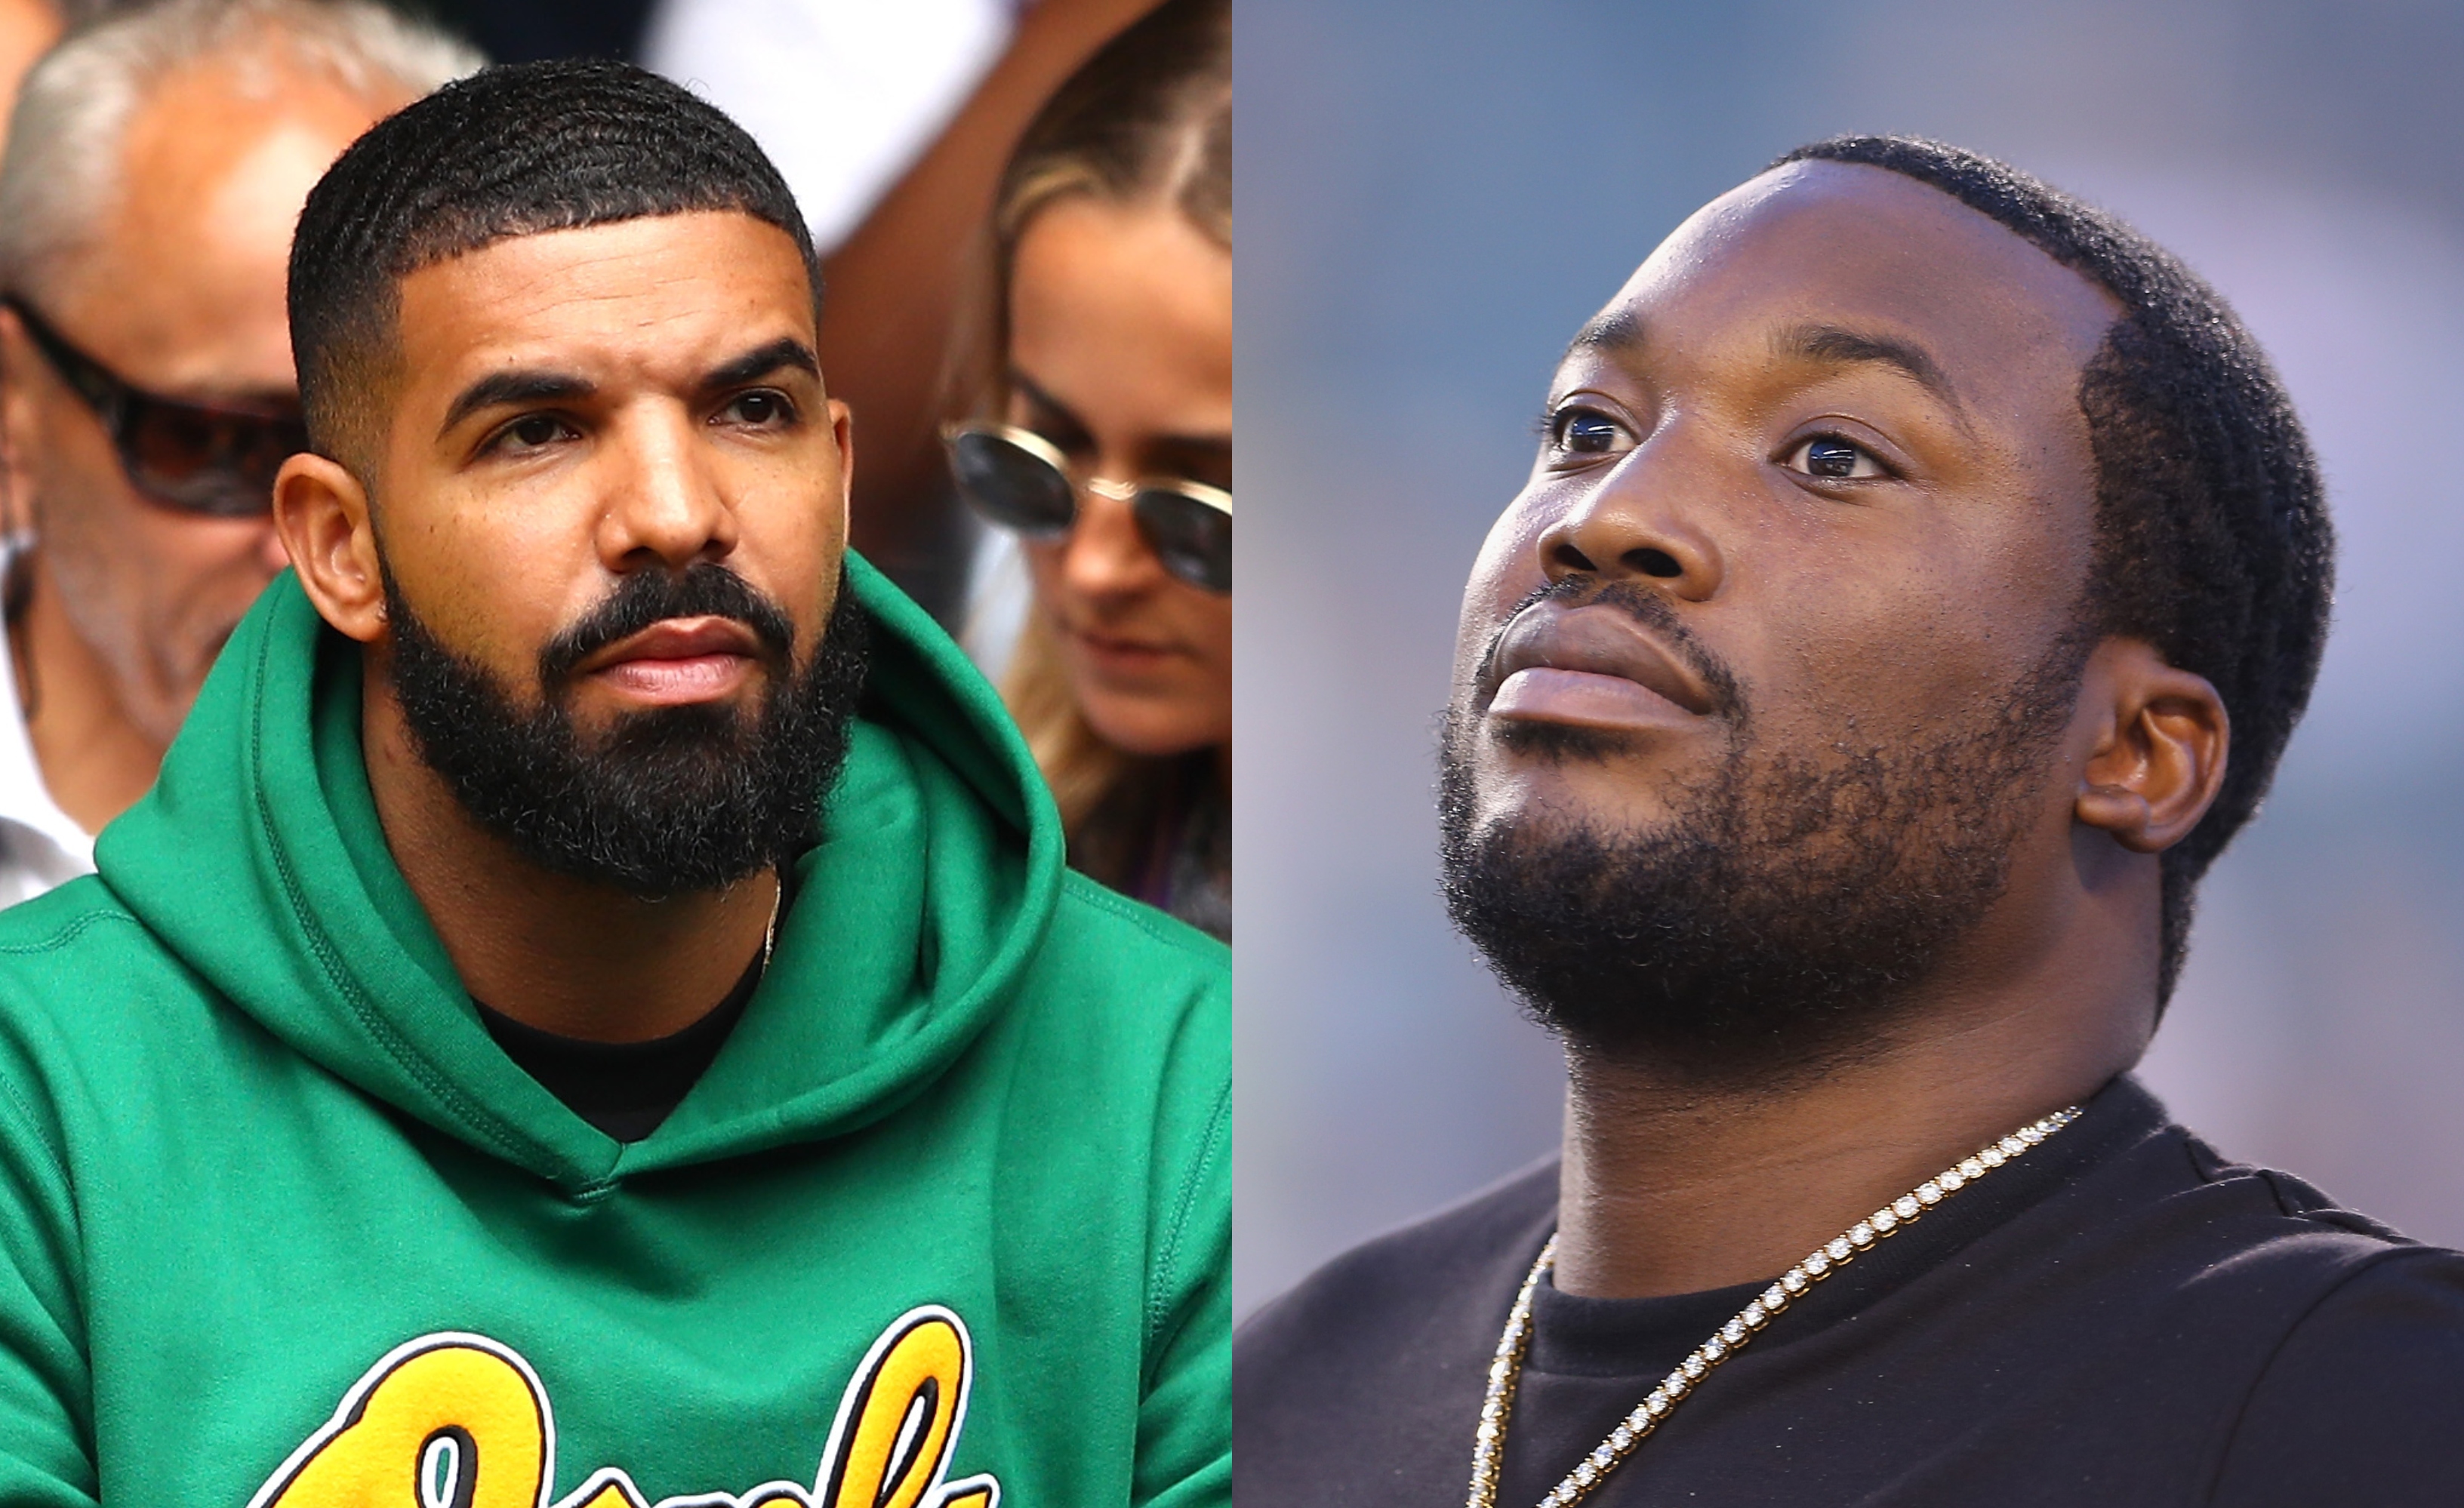 Meek Mill Announces on Instagram He's Done Beefing With Drake